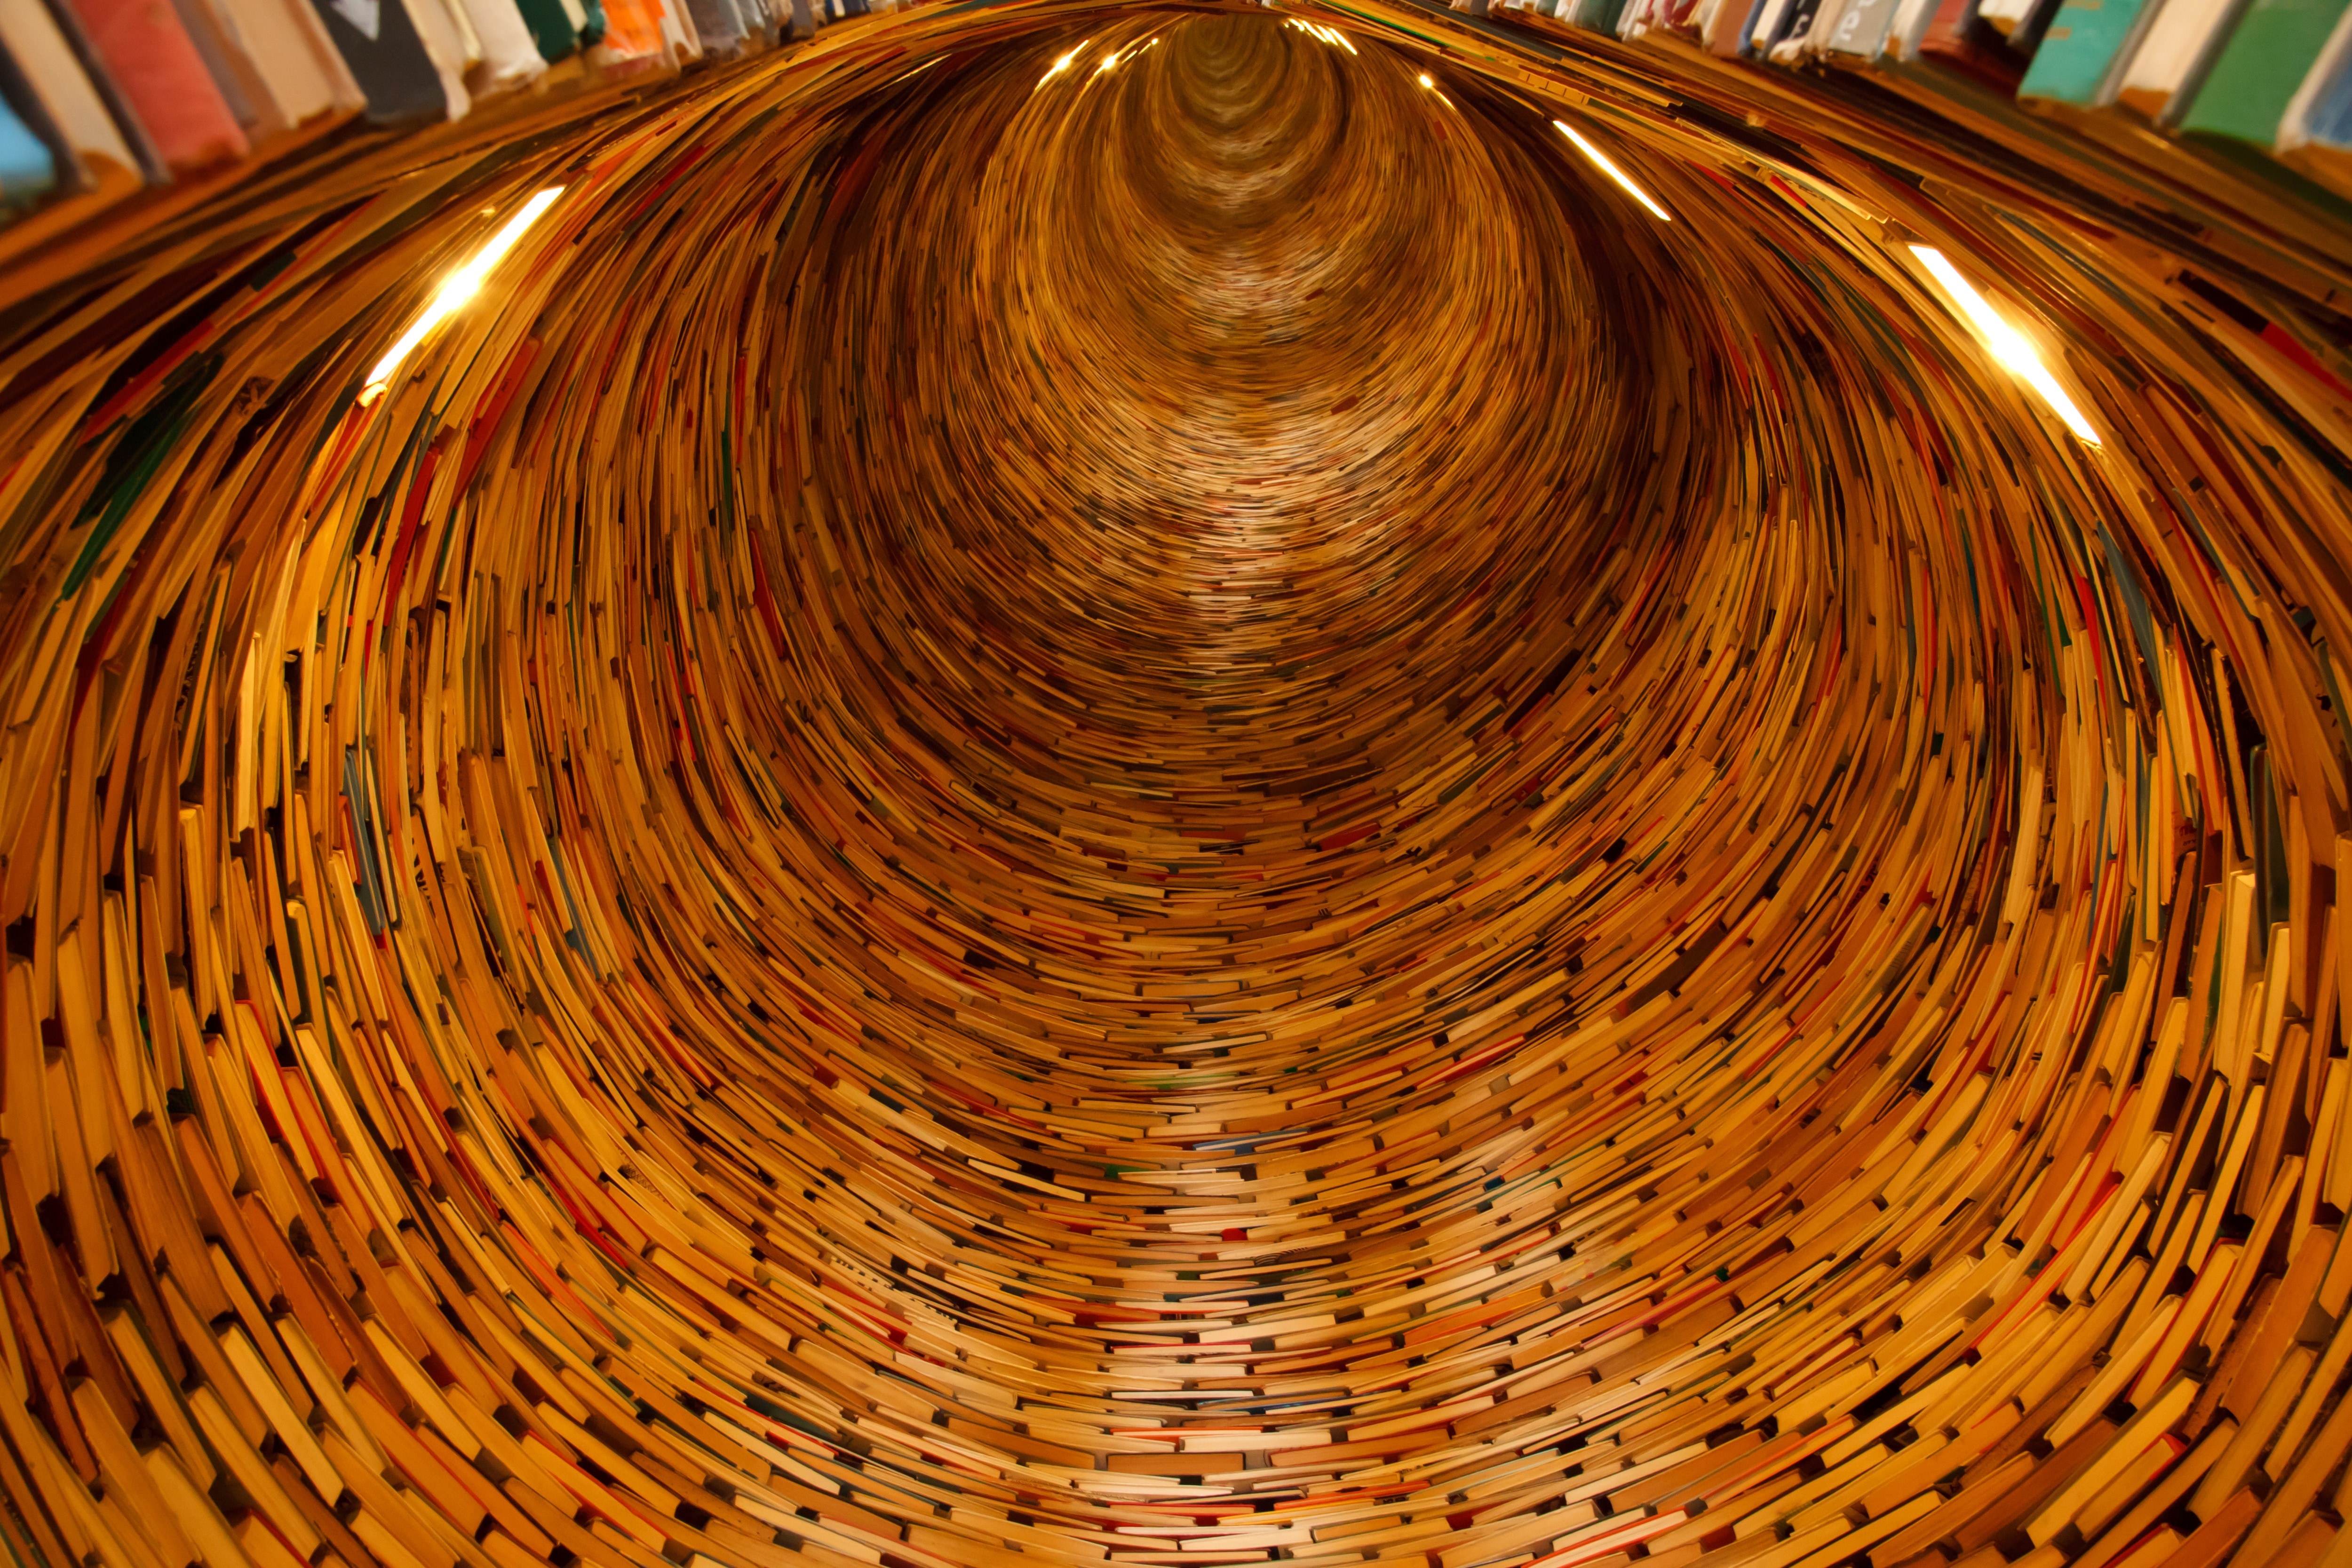 Knowledge, Tunnel, Books, Many, Library, basket, textured